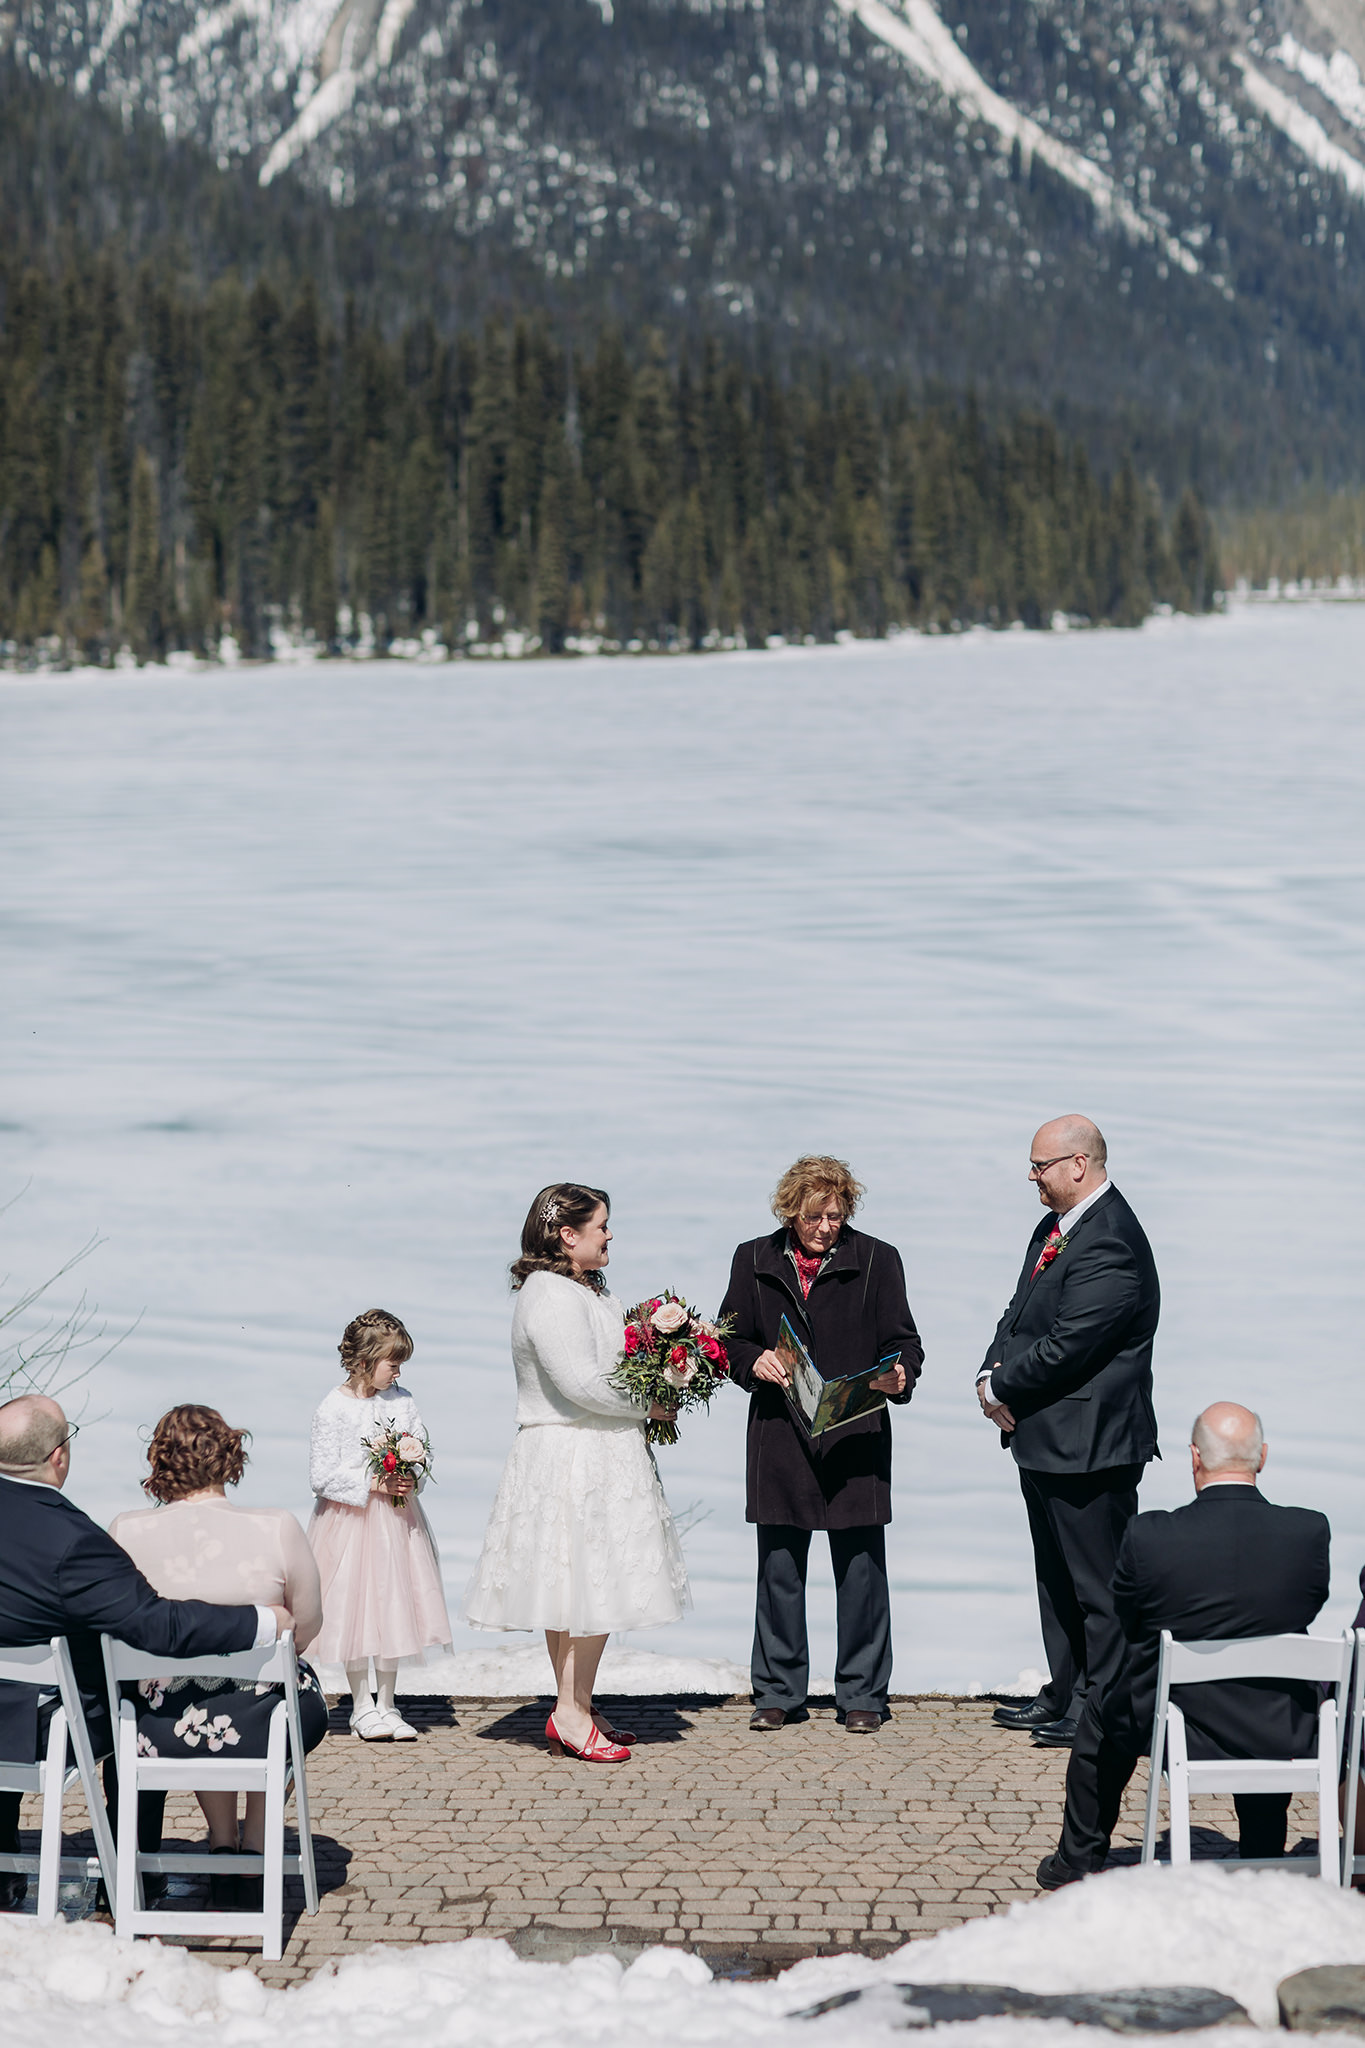 Spring mountain wedding ceremony at the snowy outdoor Viewpoint overlooking Emerald Lake at Emerald Lake Lodge photographed by local mountain intimate wedding & elopement Photographer ENV Photography